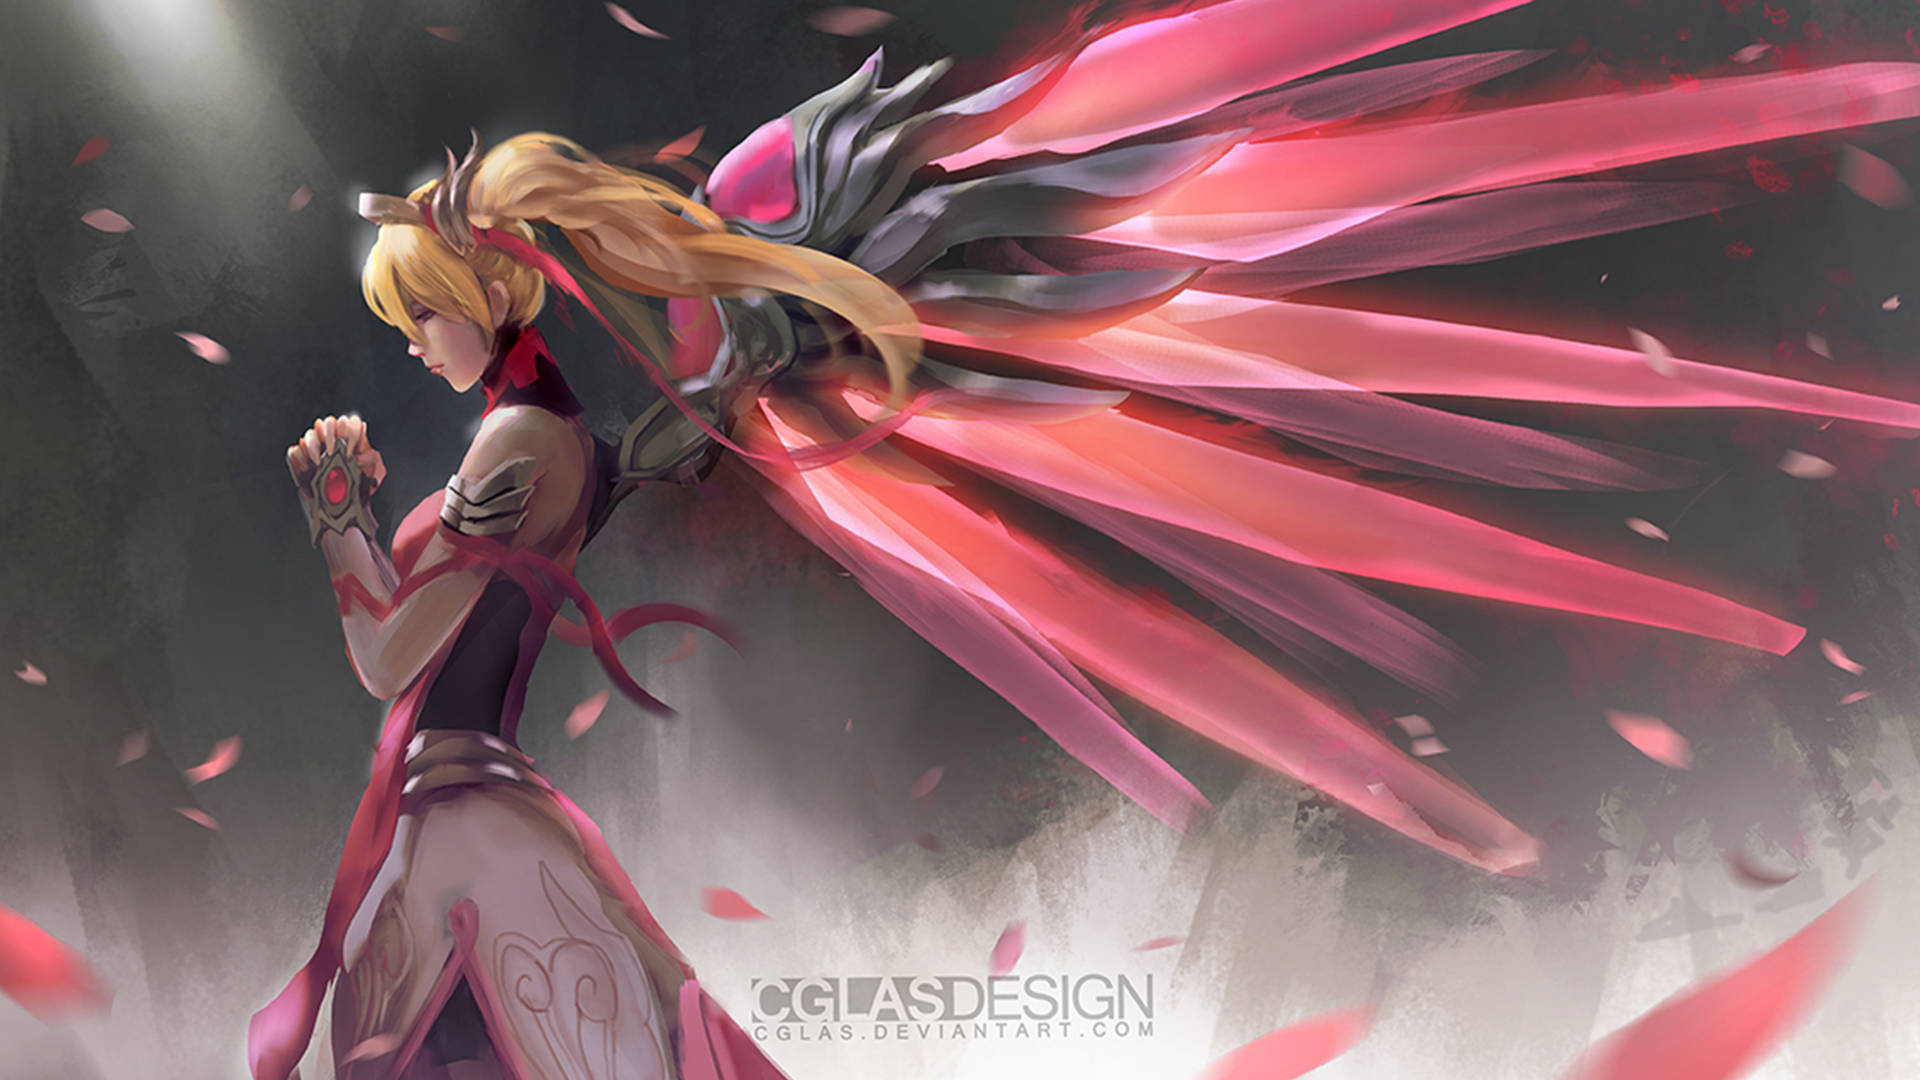 Let's Make the World Pink With Mercy Wallpaper